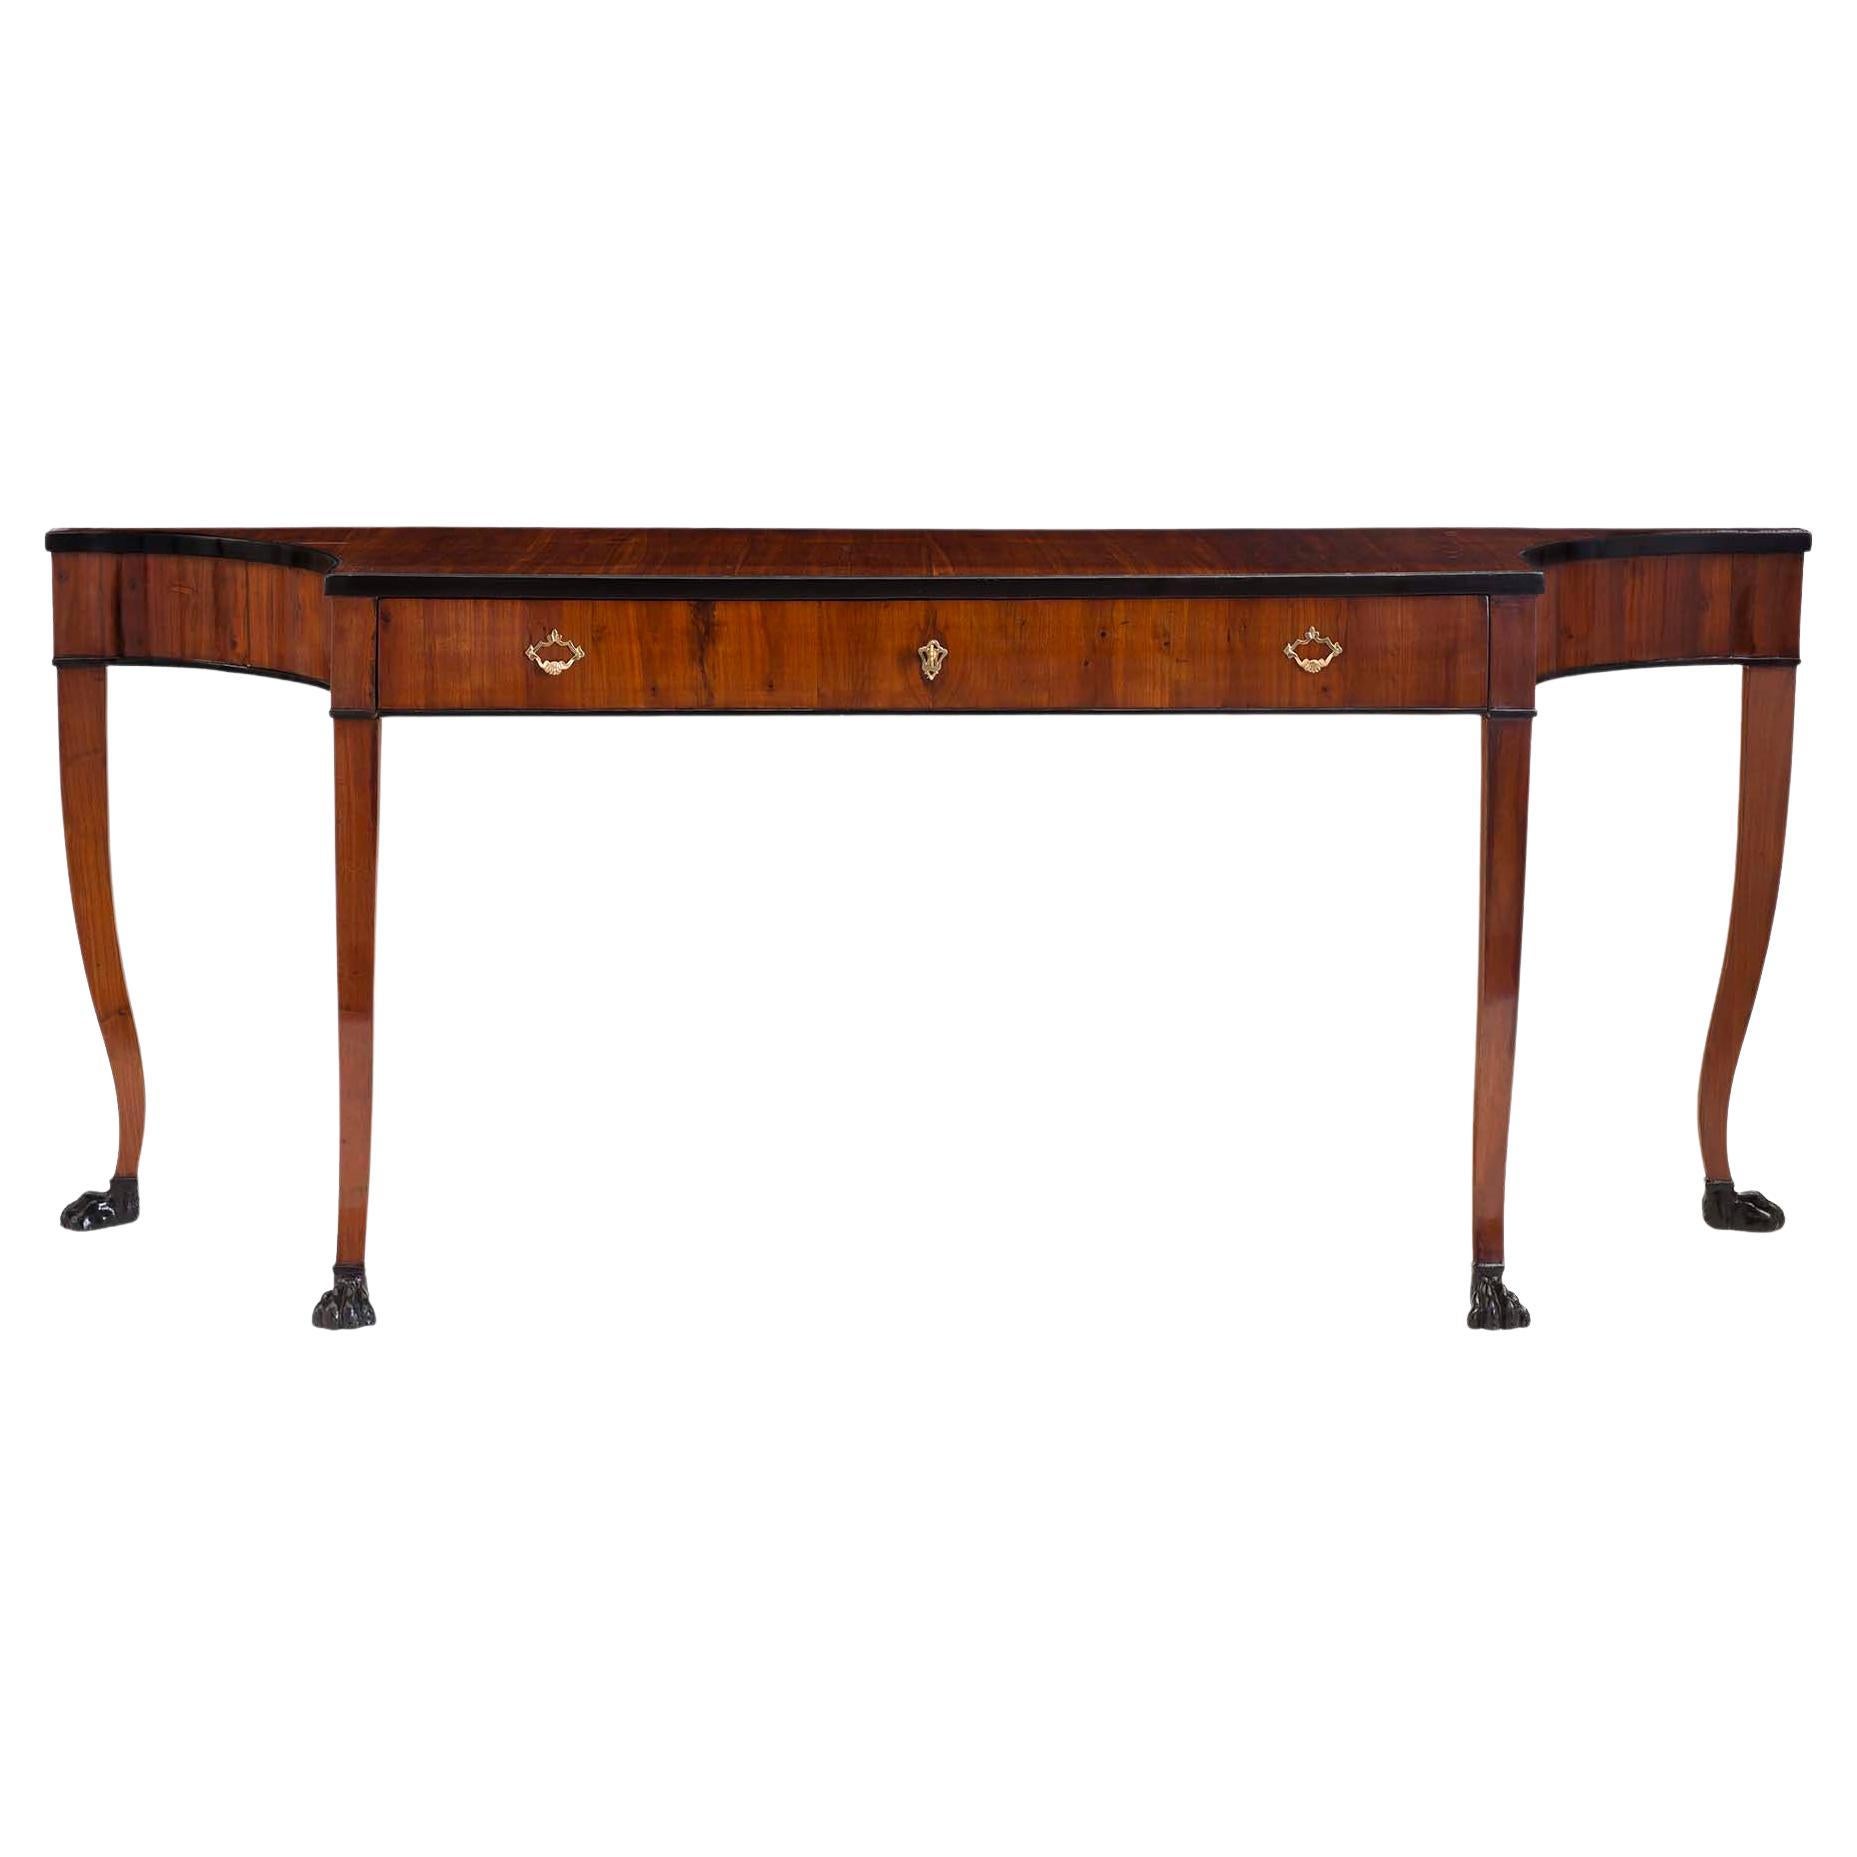 Italian Early 19th Century Neoclassical Style Mahogany and Fruitwood Console